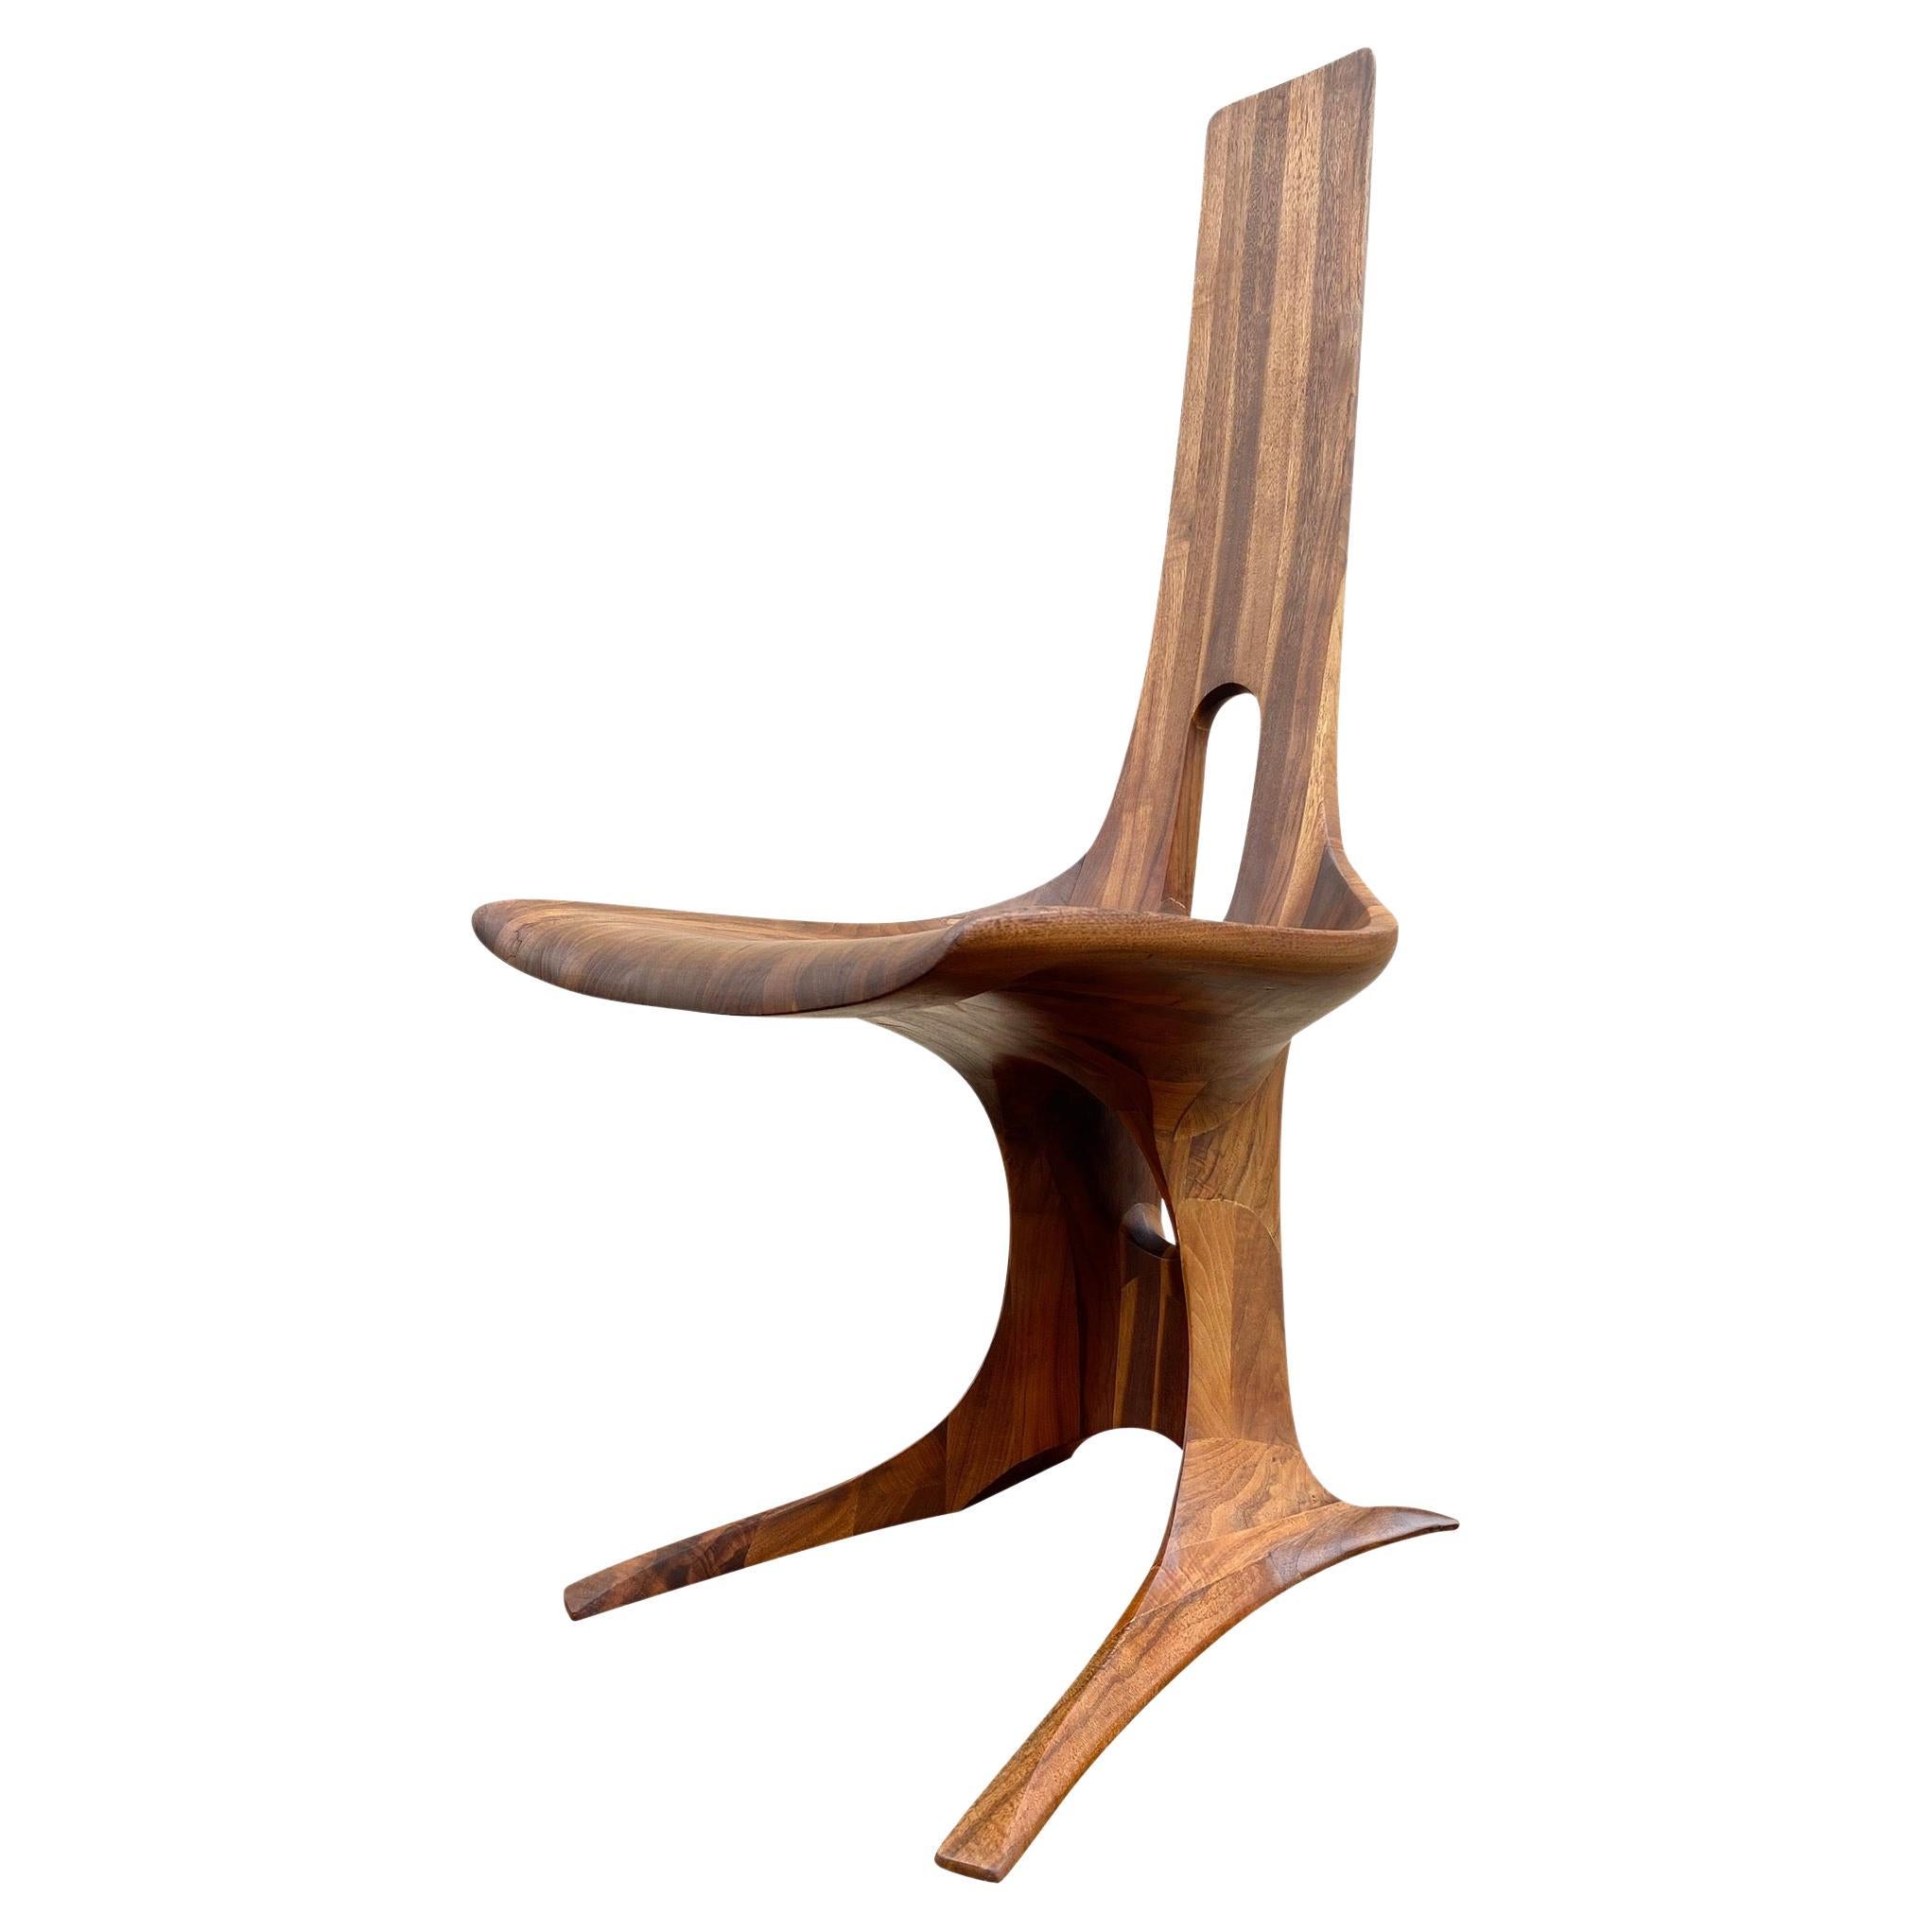 Modernist Sculptural Walnut Chair by Edward G. Livingston for Archotypo (1970)